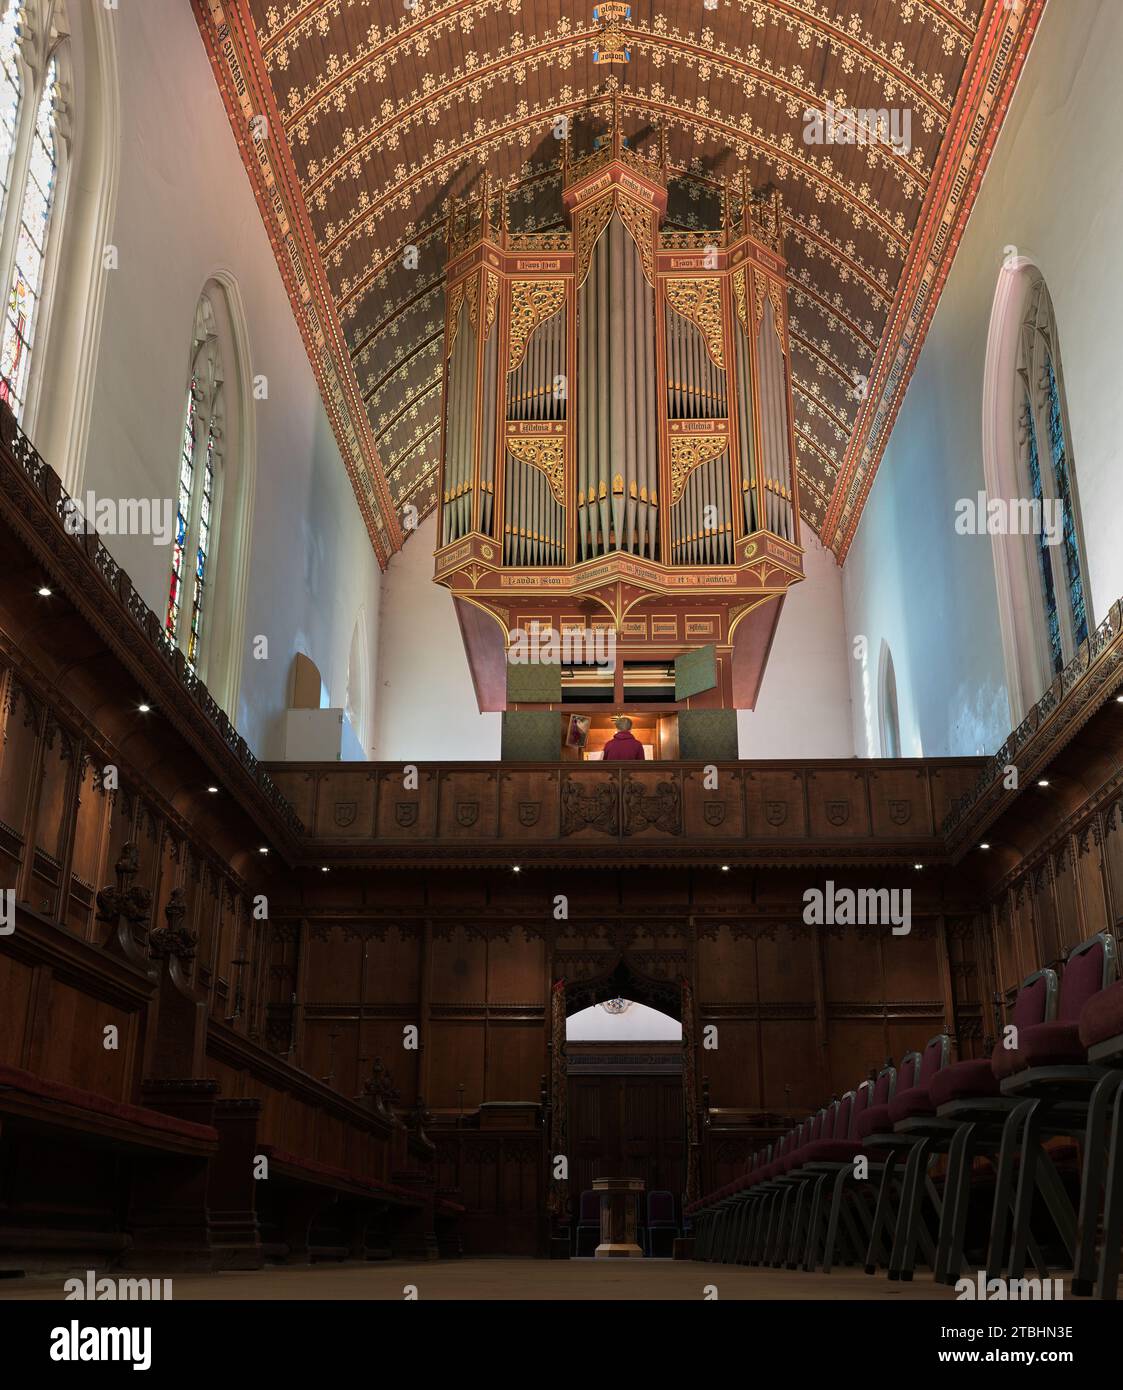 Organ pipes and decorated ceiling at chapel at Queens' College, University of Cambridge, England. Stock Photo